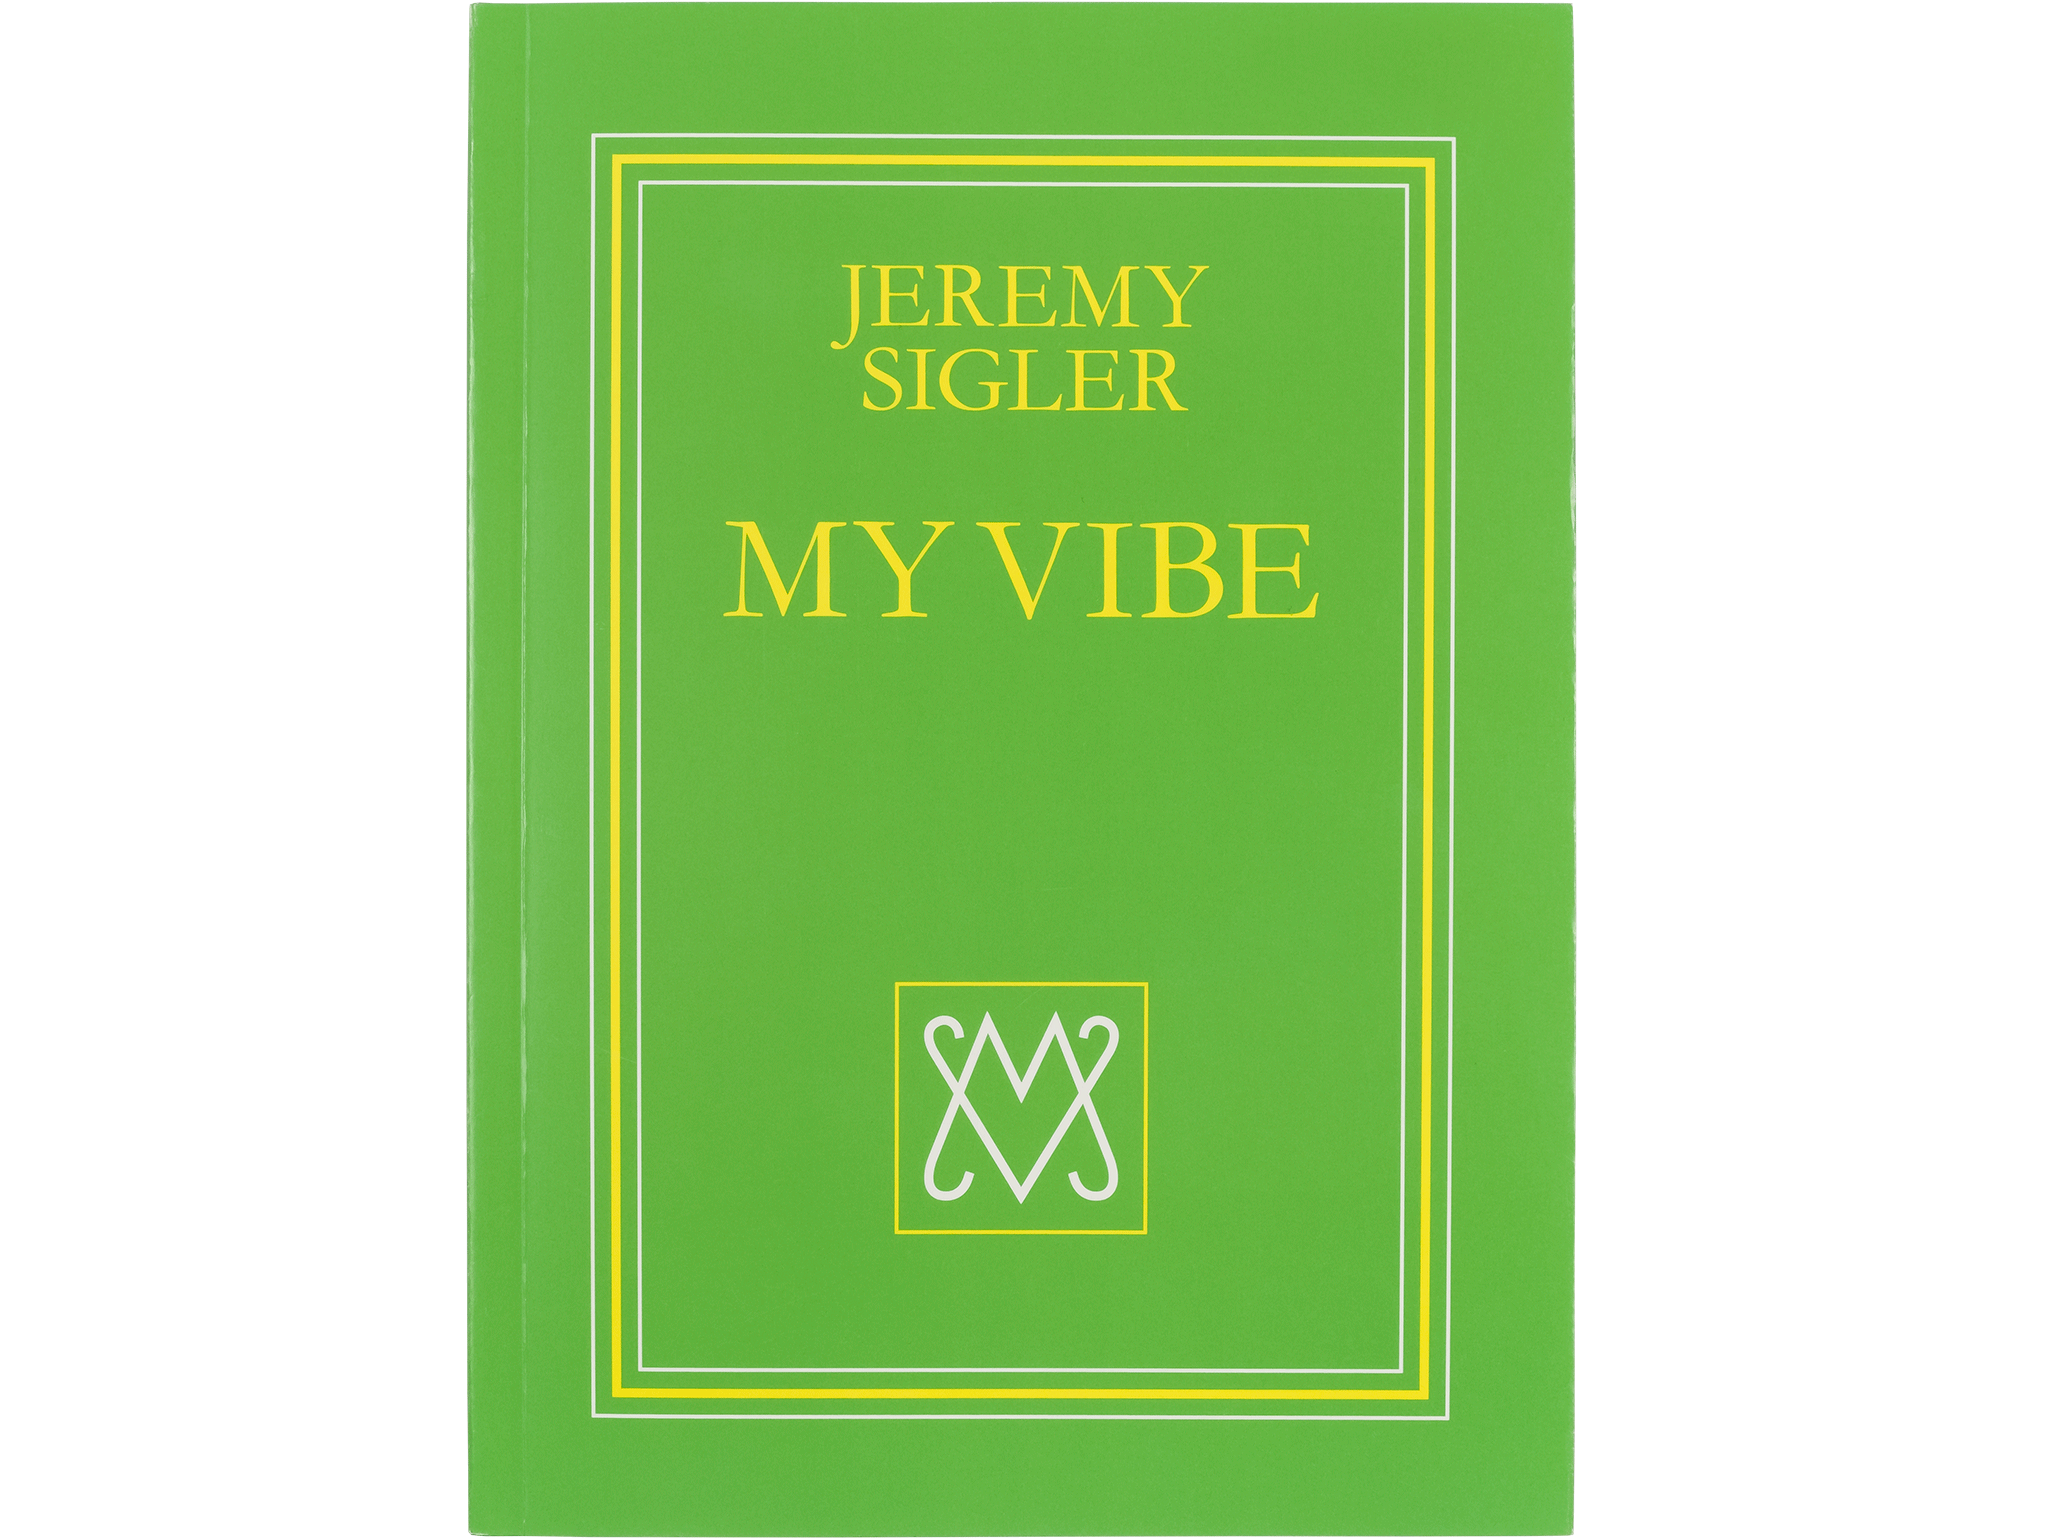 Cover of My Vibe book